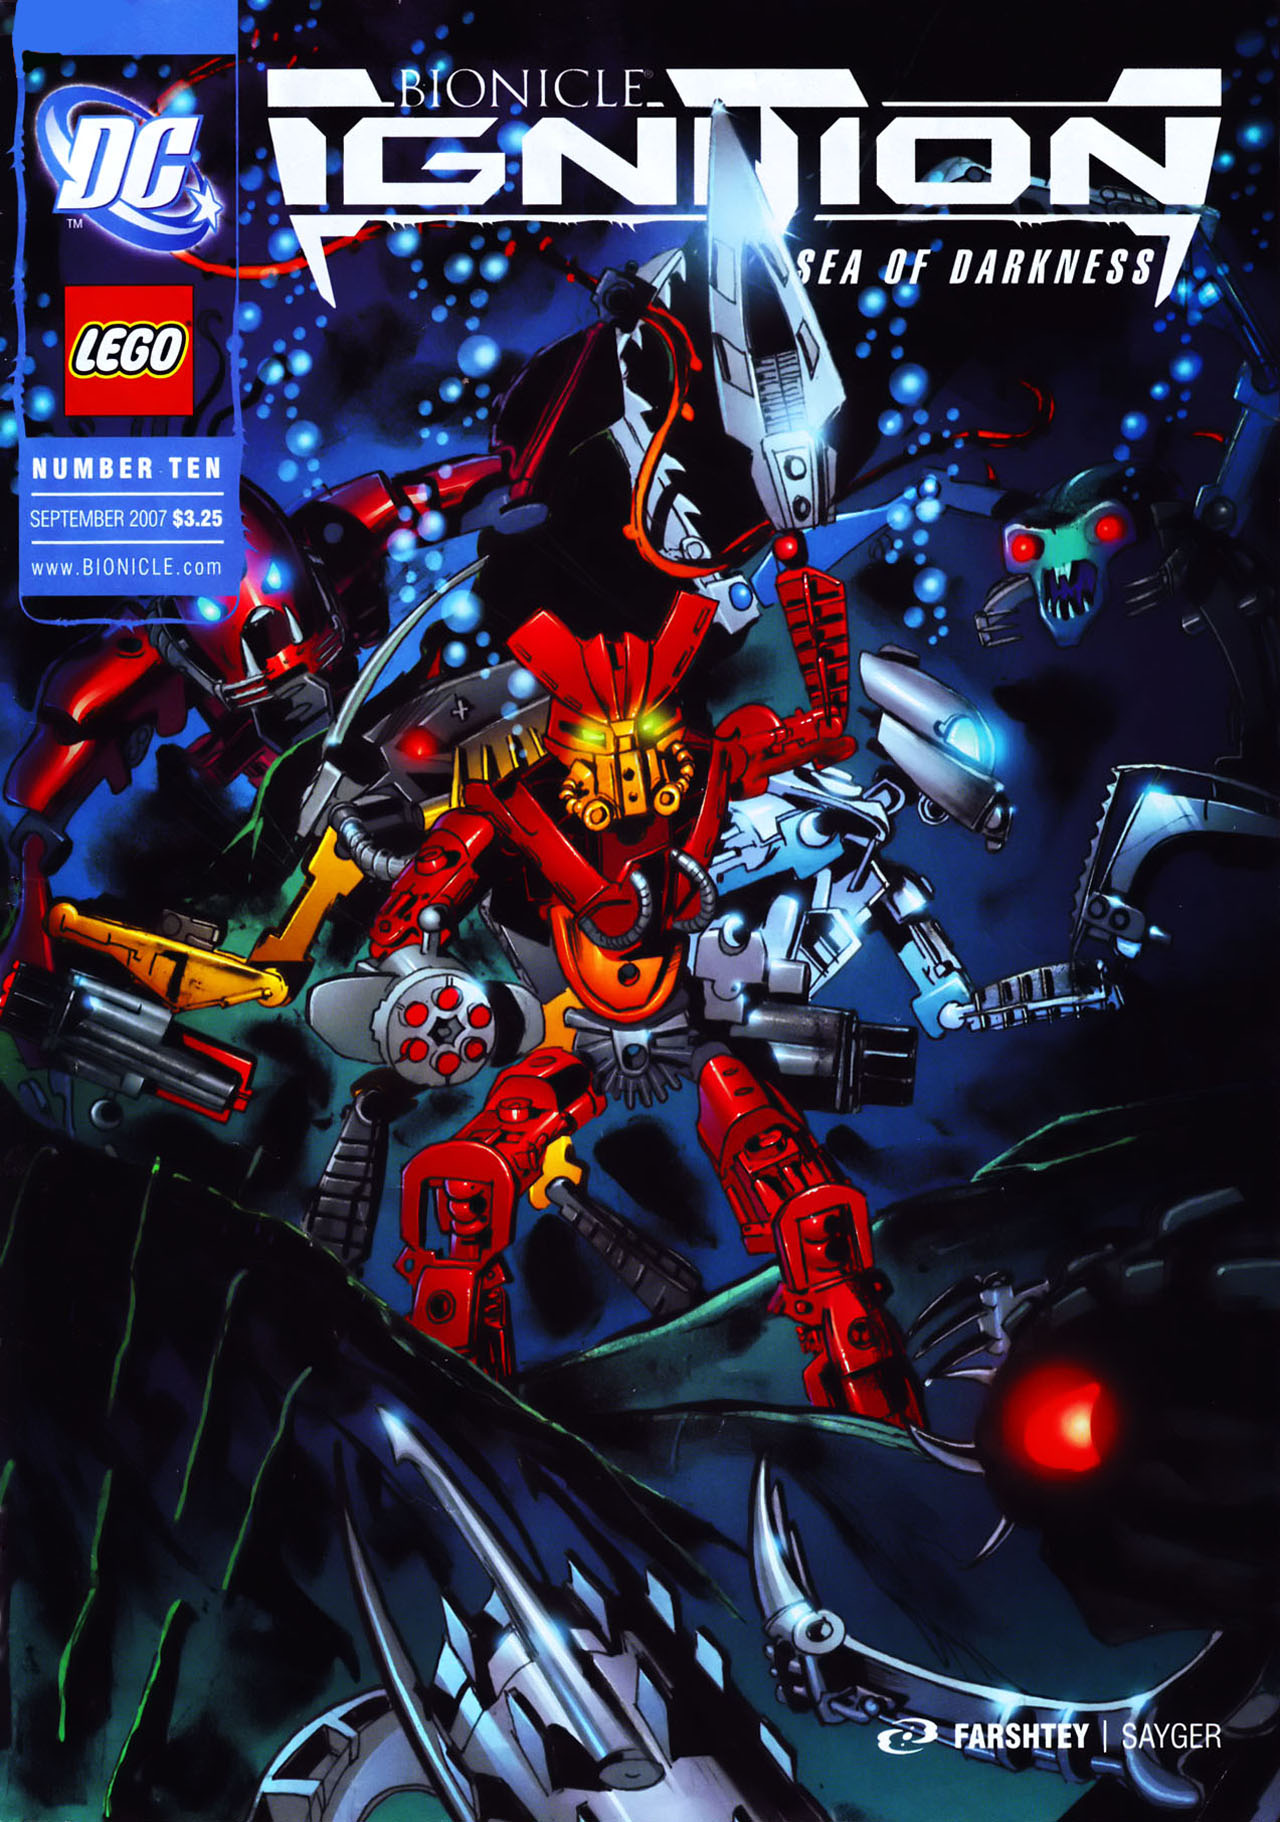 Read online Bionicle: Ignition comic -  Issue #10 - 1